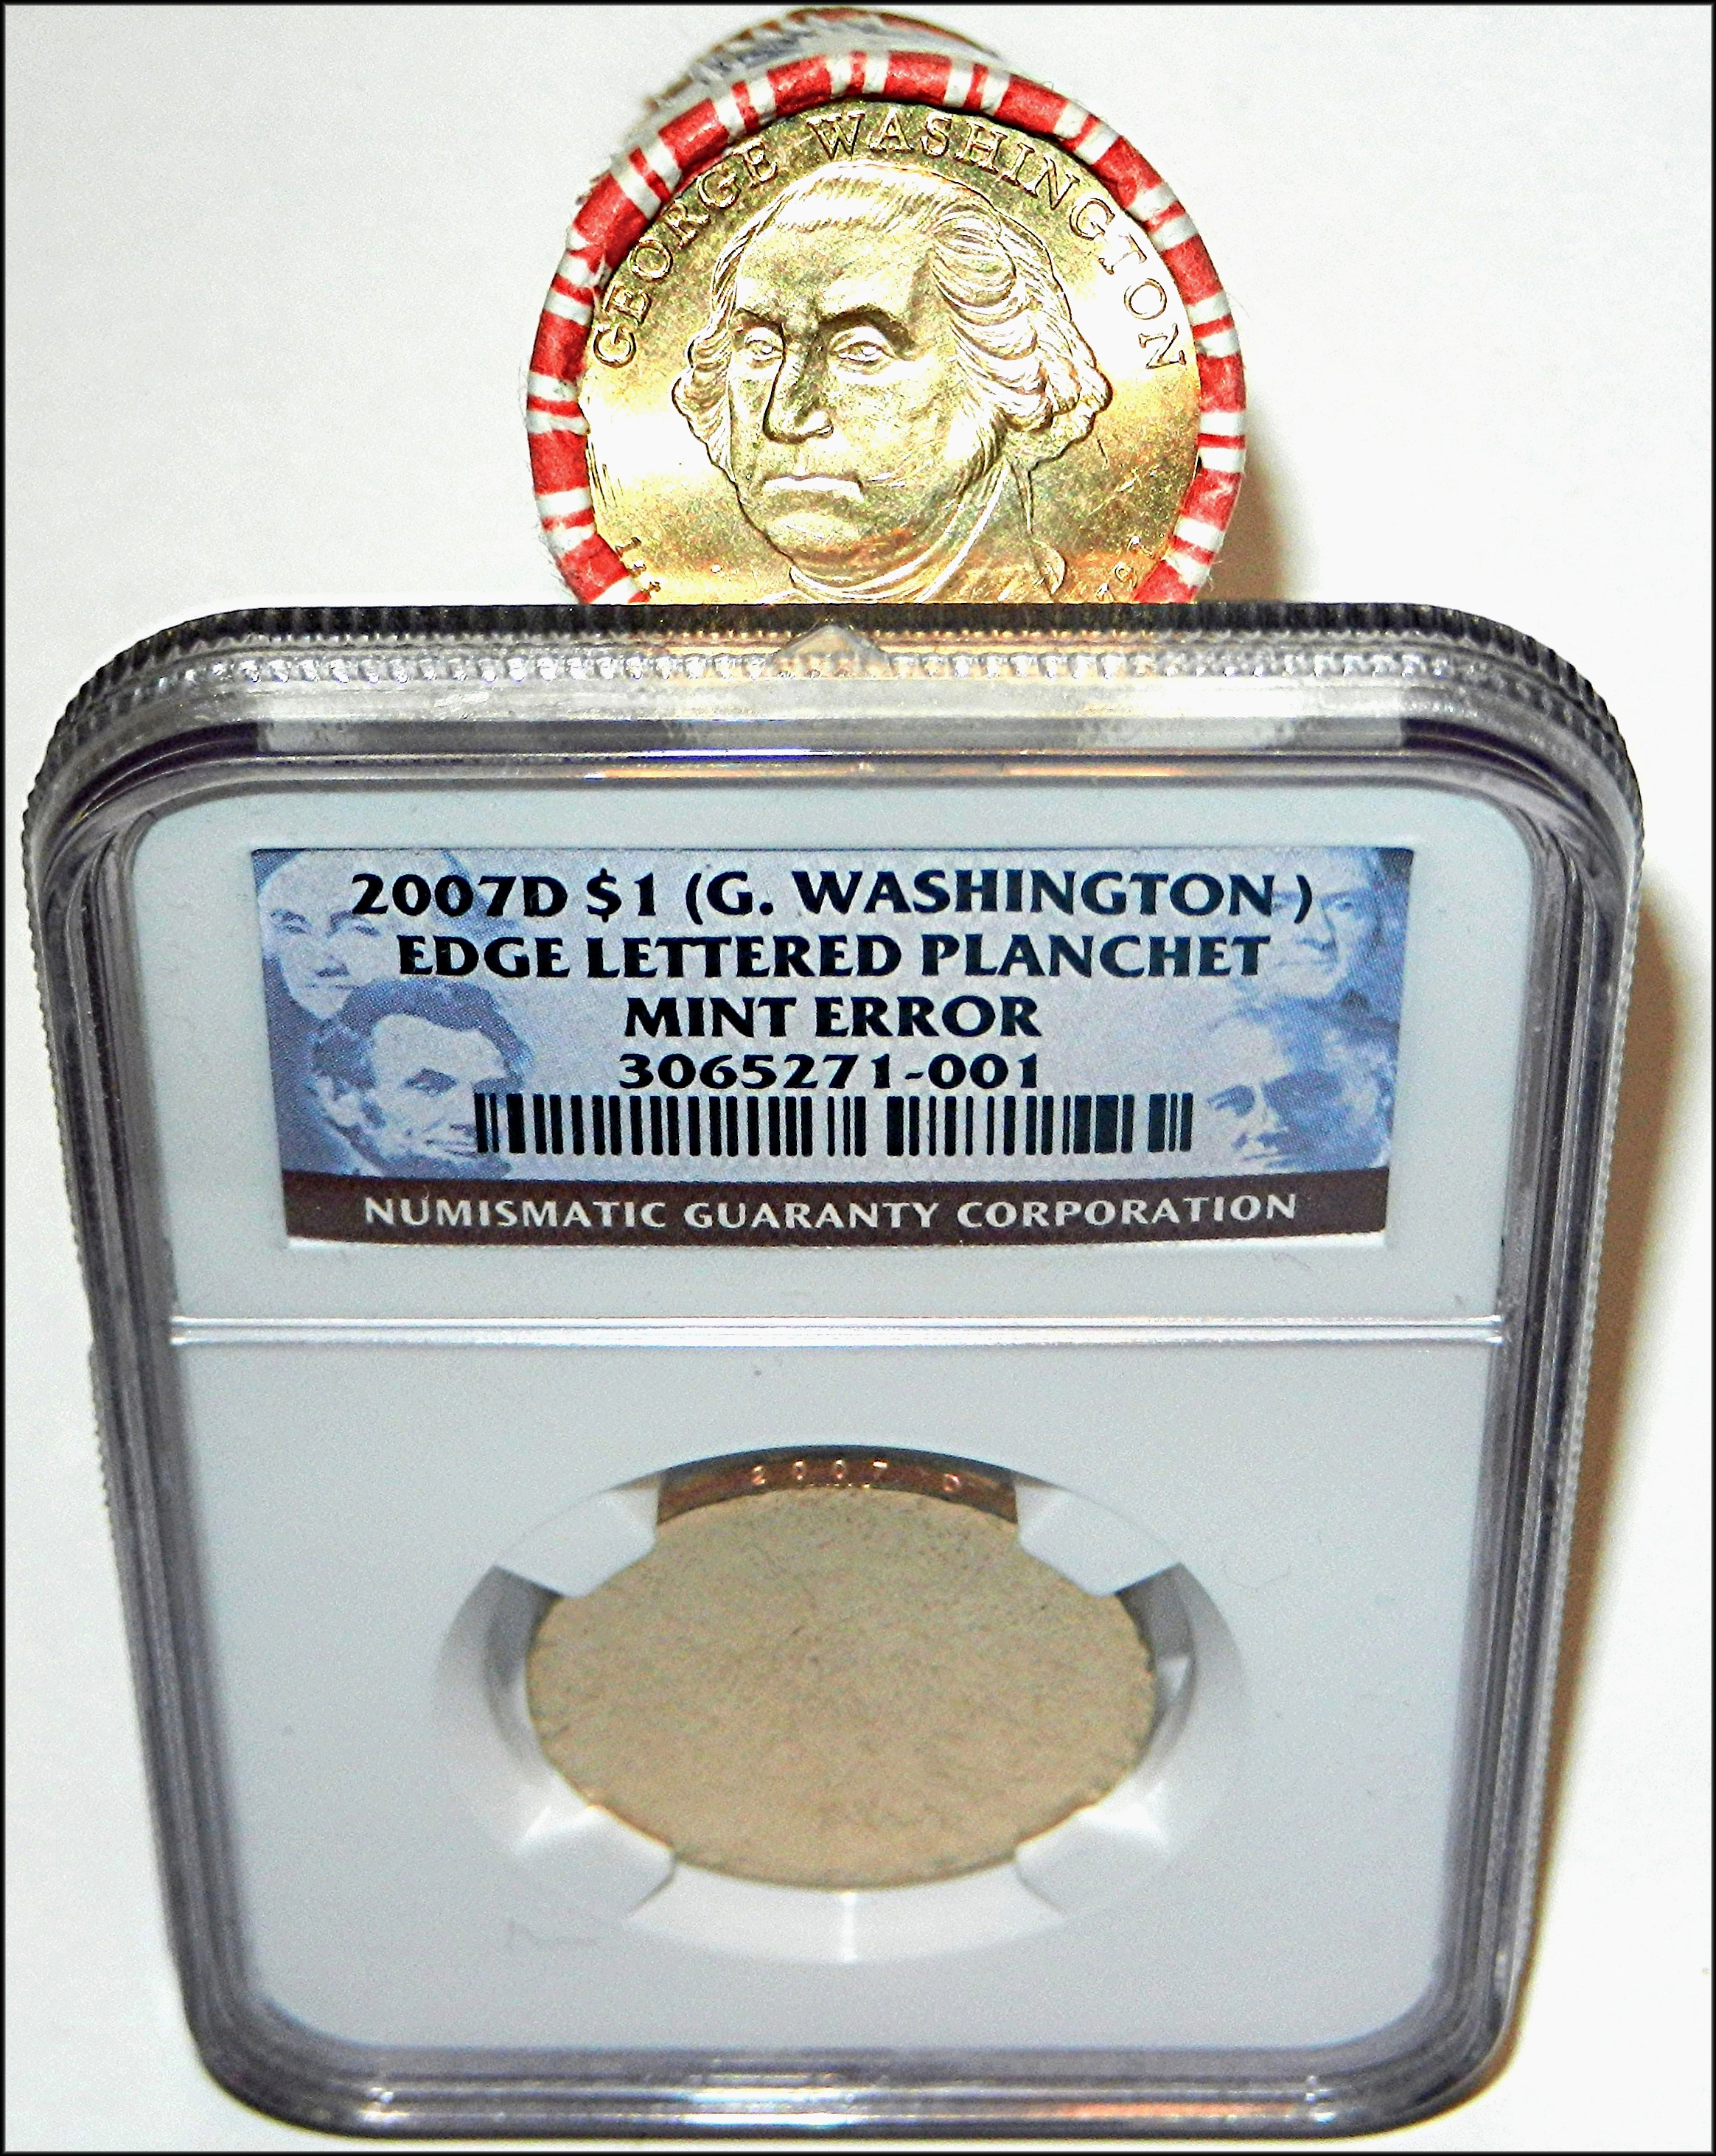 George Washington Planchet With Edge Lettering